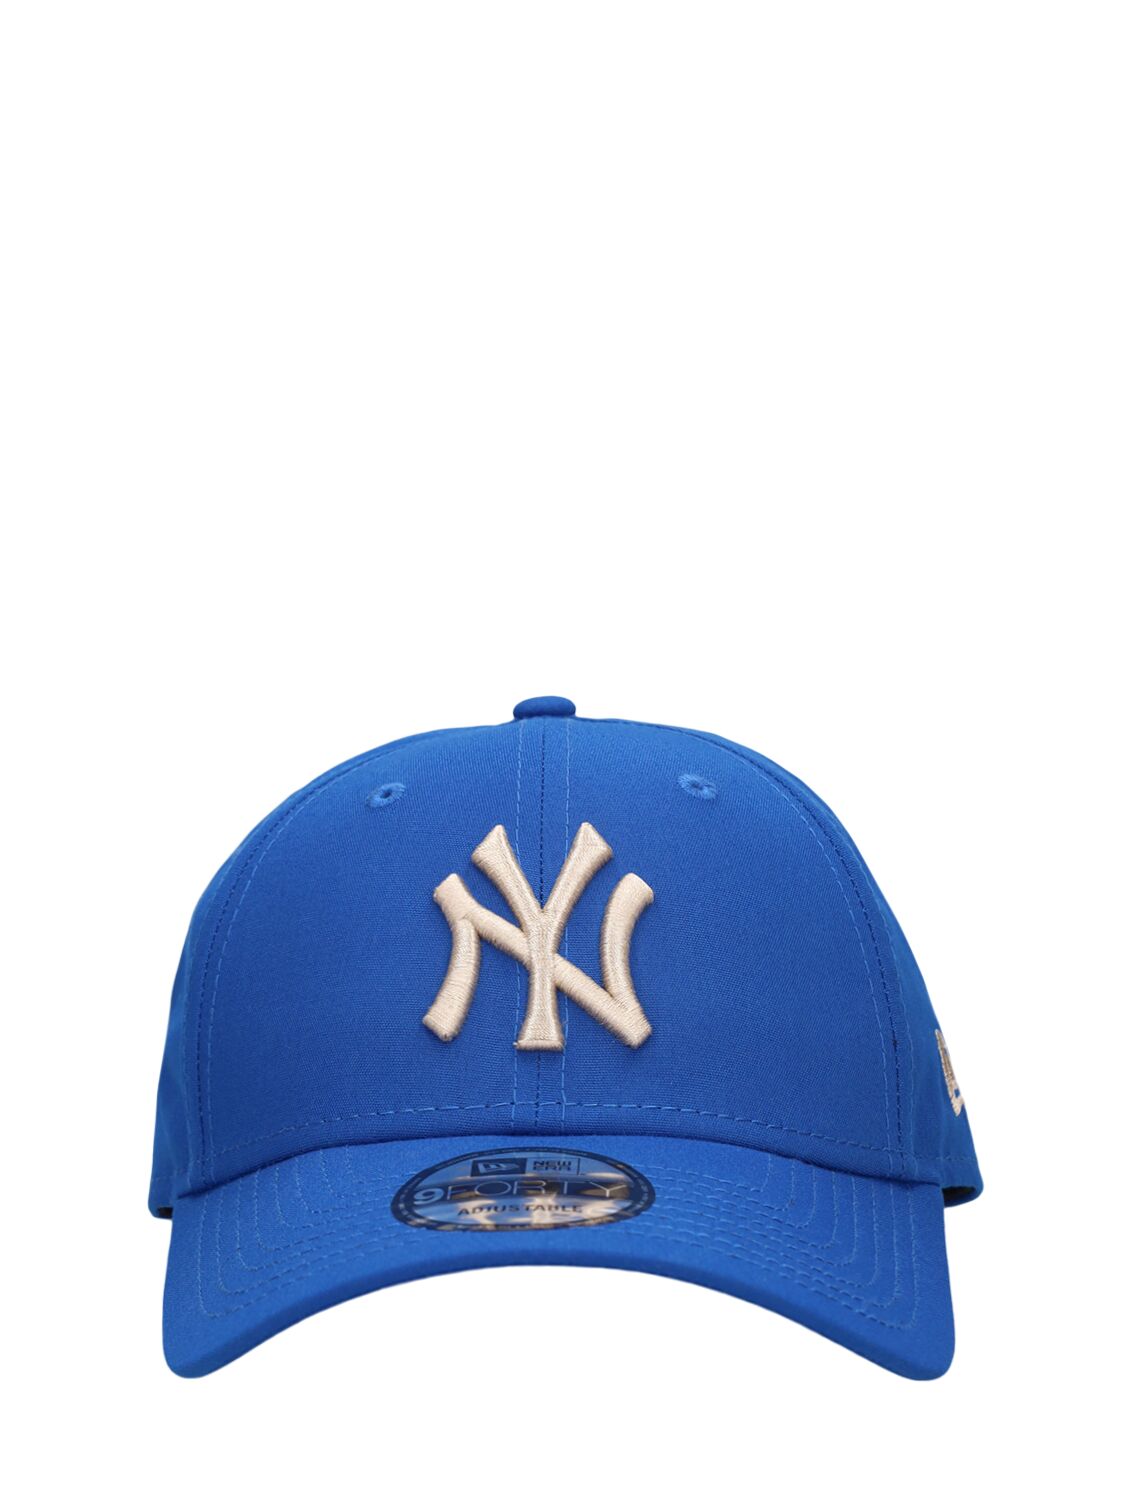 New Era Ny Yankees Repreve 9forty科技织物帽子 In Blue,beige